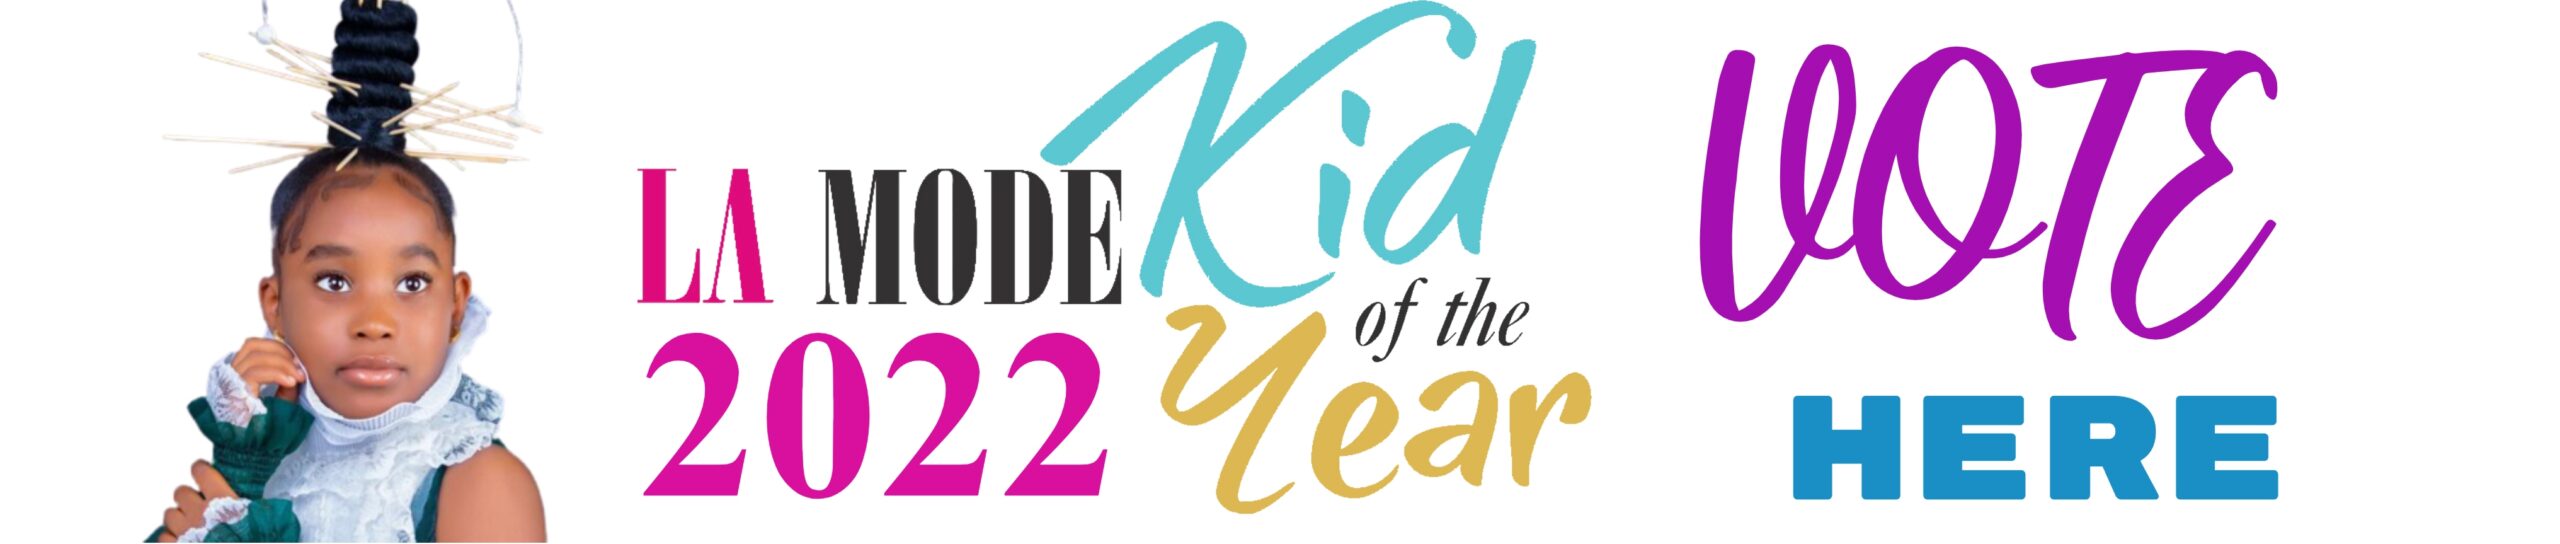 La Mode Kid of The Year 2022 Vote Banner